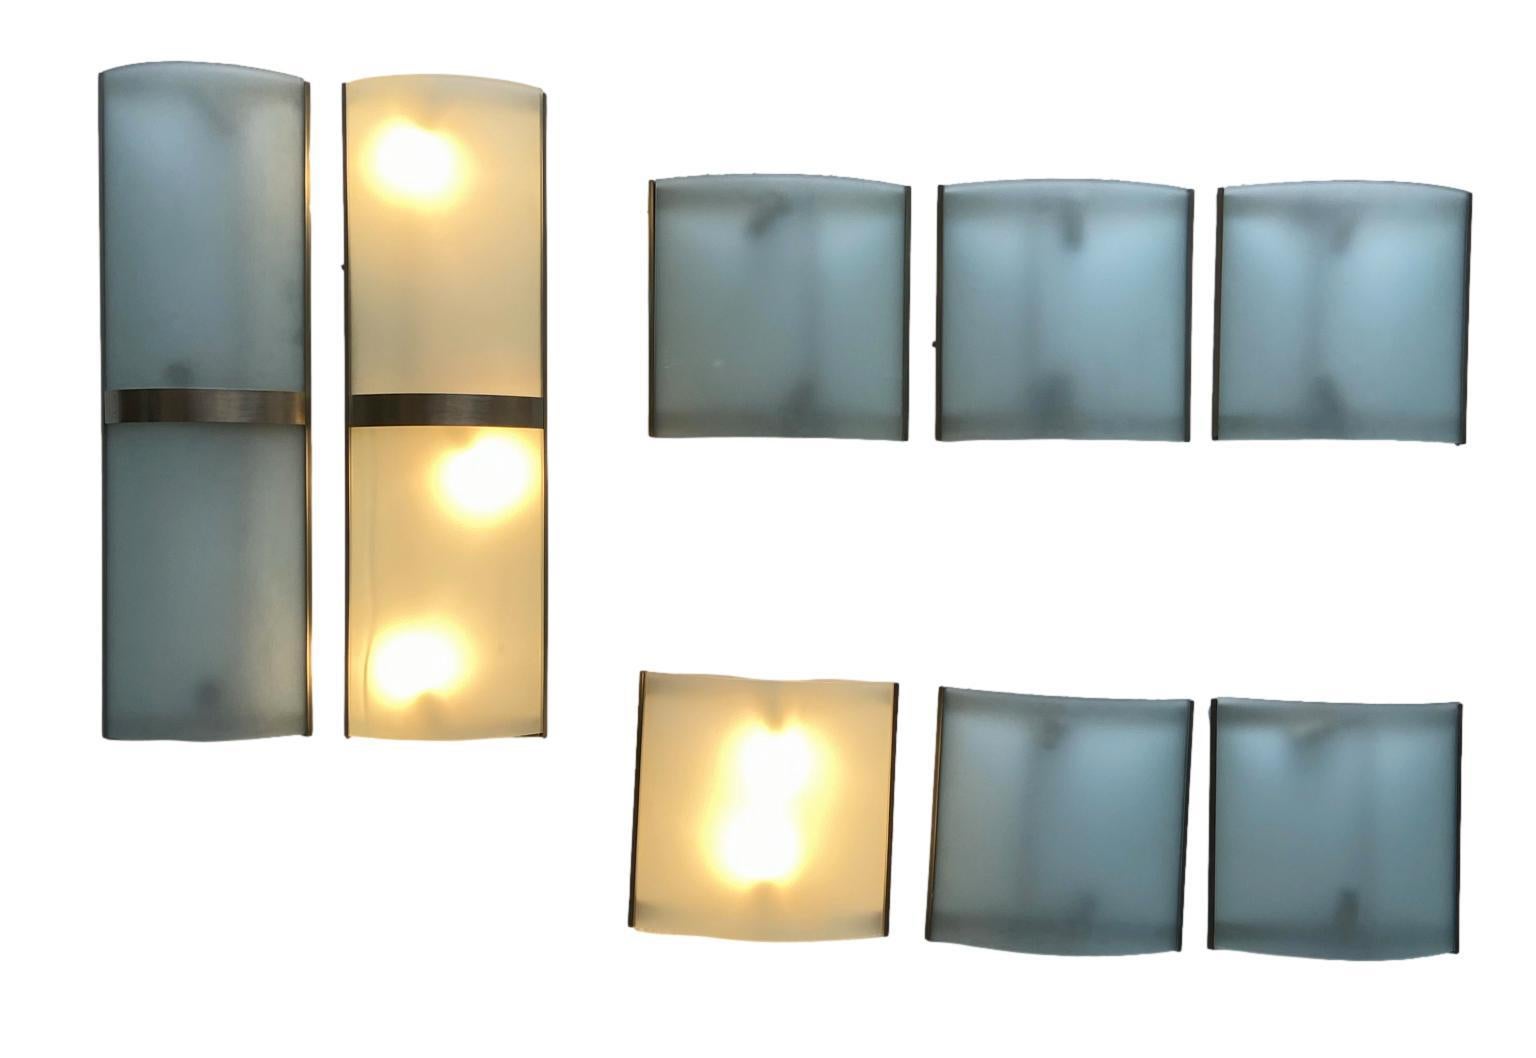 Steel Fontana Arte Style Set of 9 Wall Lamps, Italy, 1960s For Sale